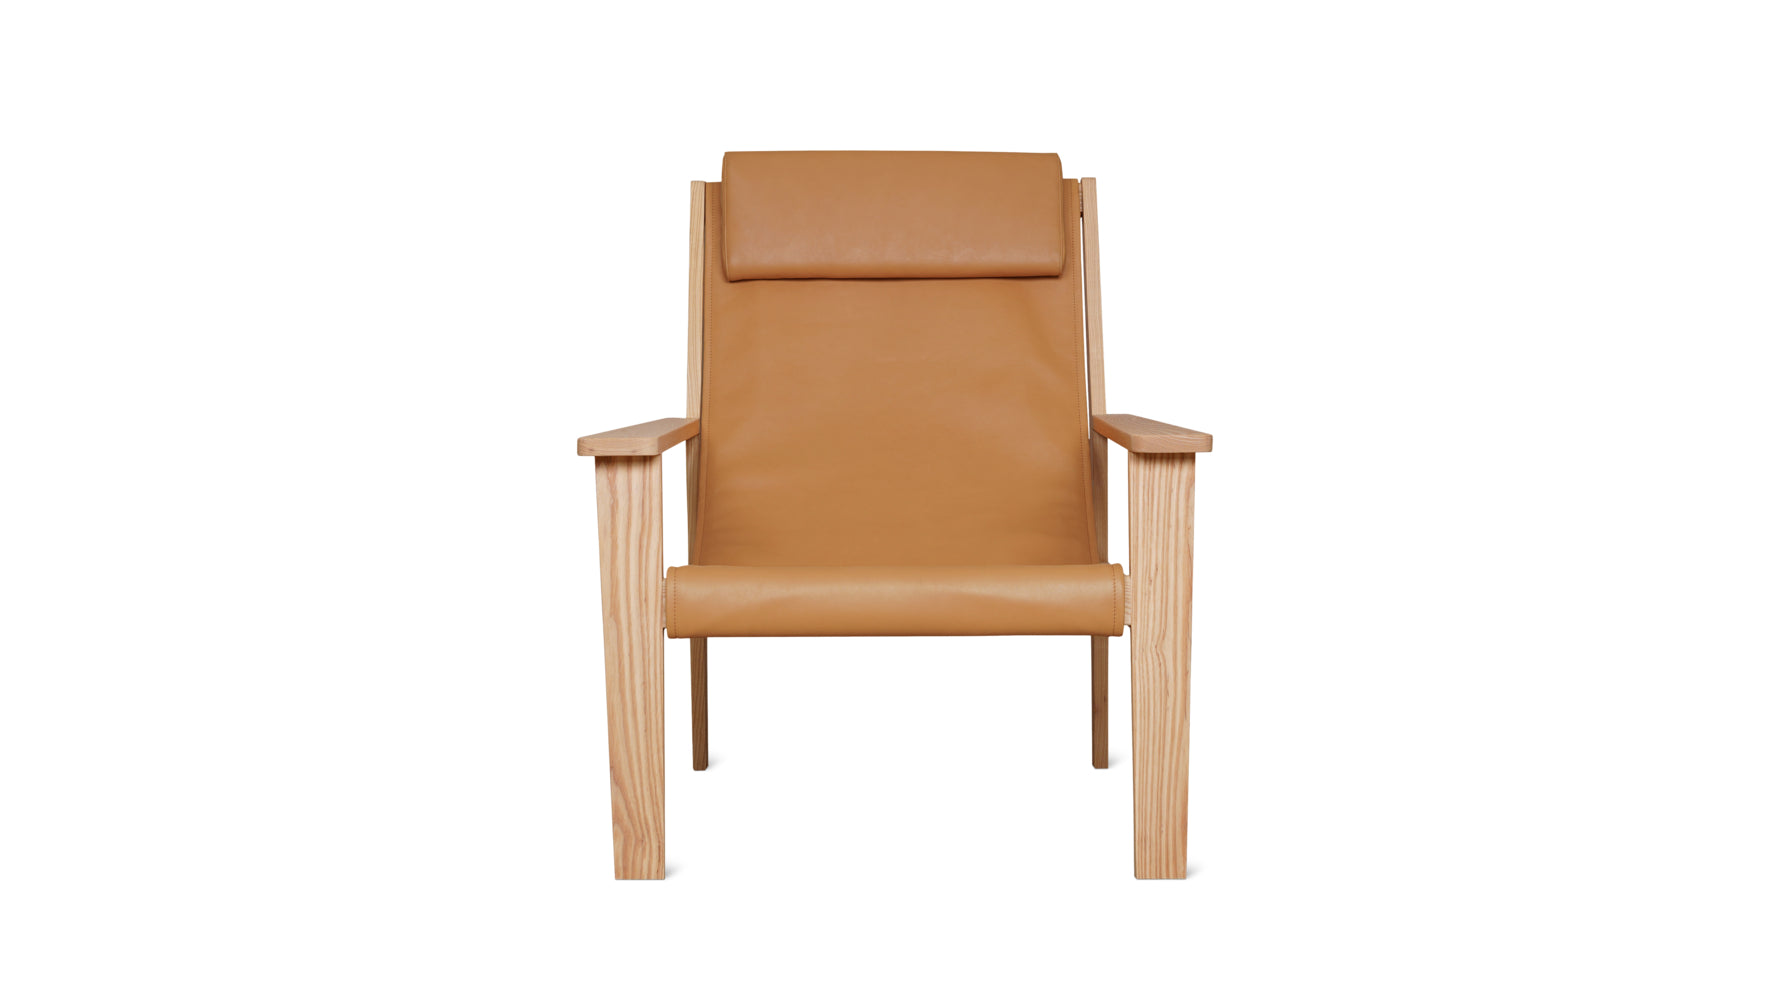 Terra Occasional Chair – The Mangata Experience